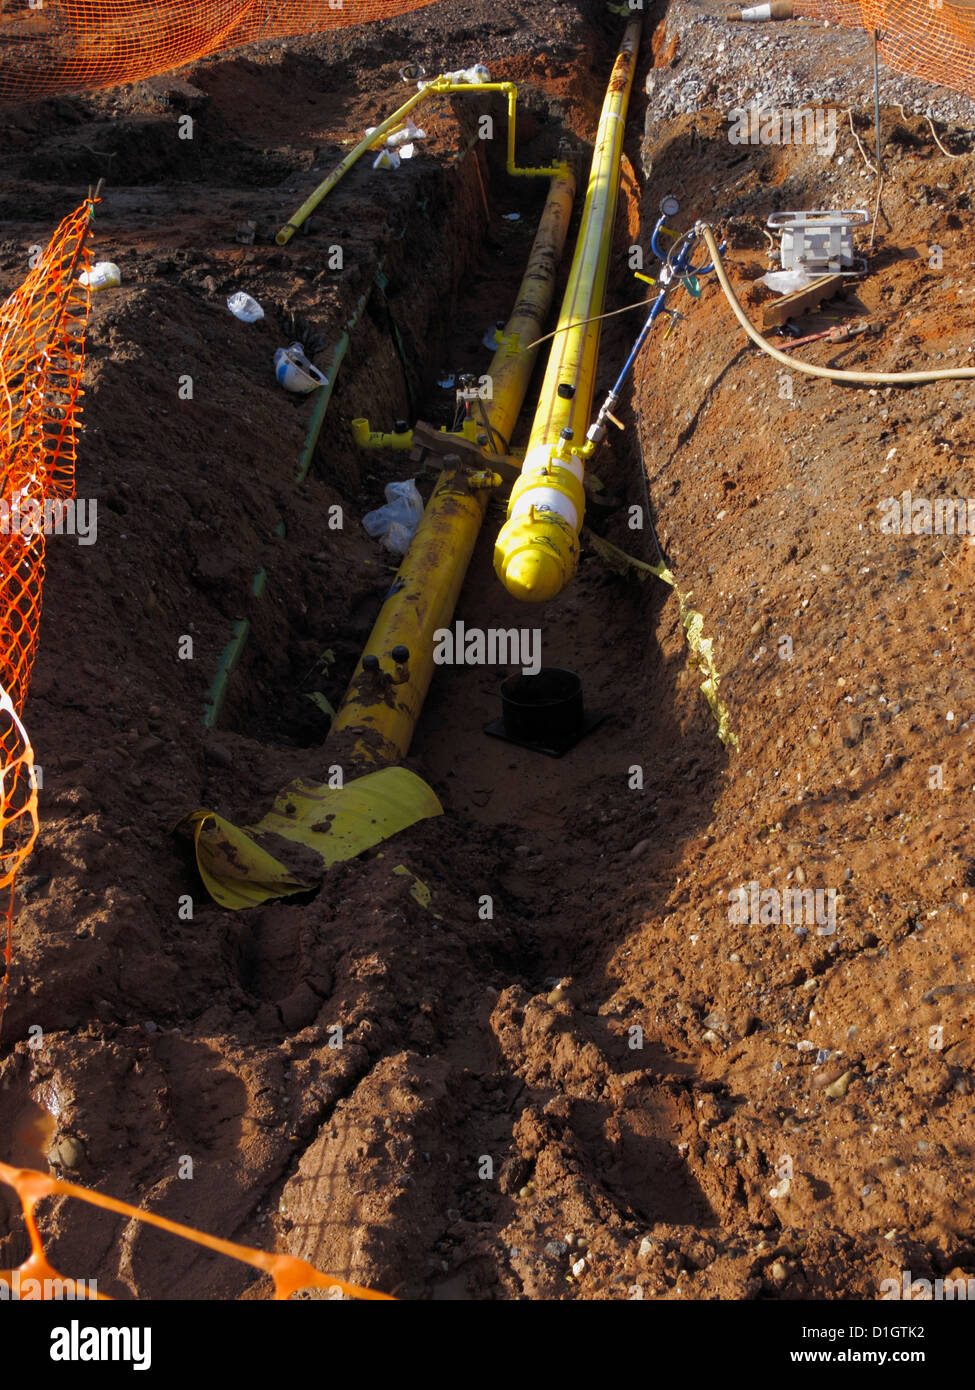 Newly laid High pressure yellow polythene gas main pipe in trench undergoing testing with pressure gauge in UK Stock Photo